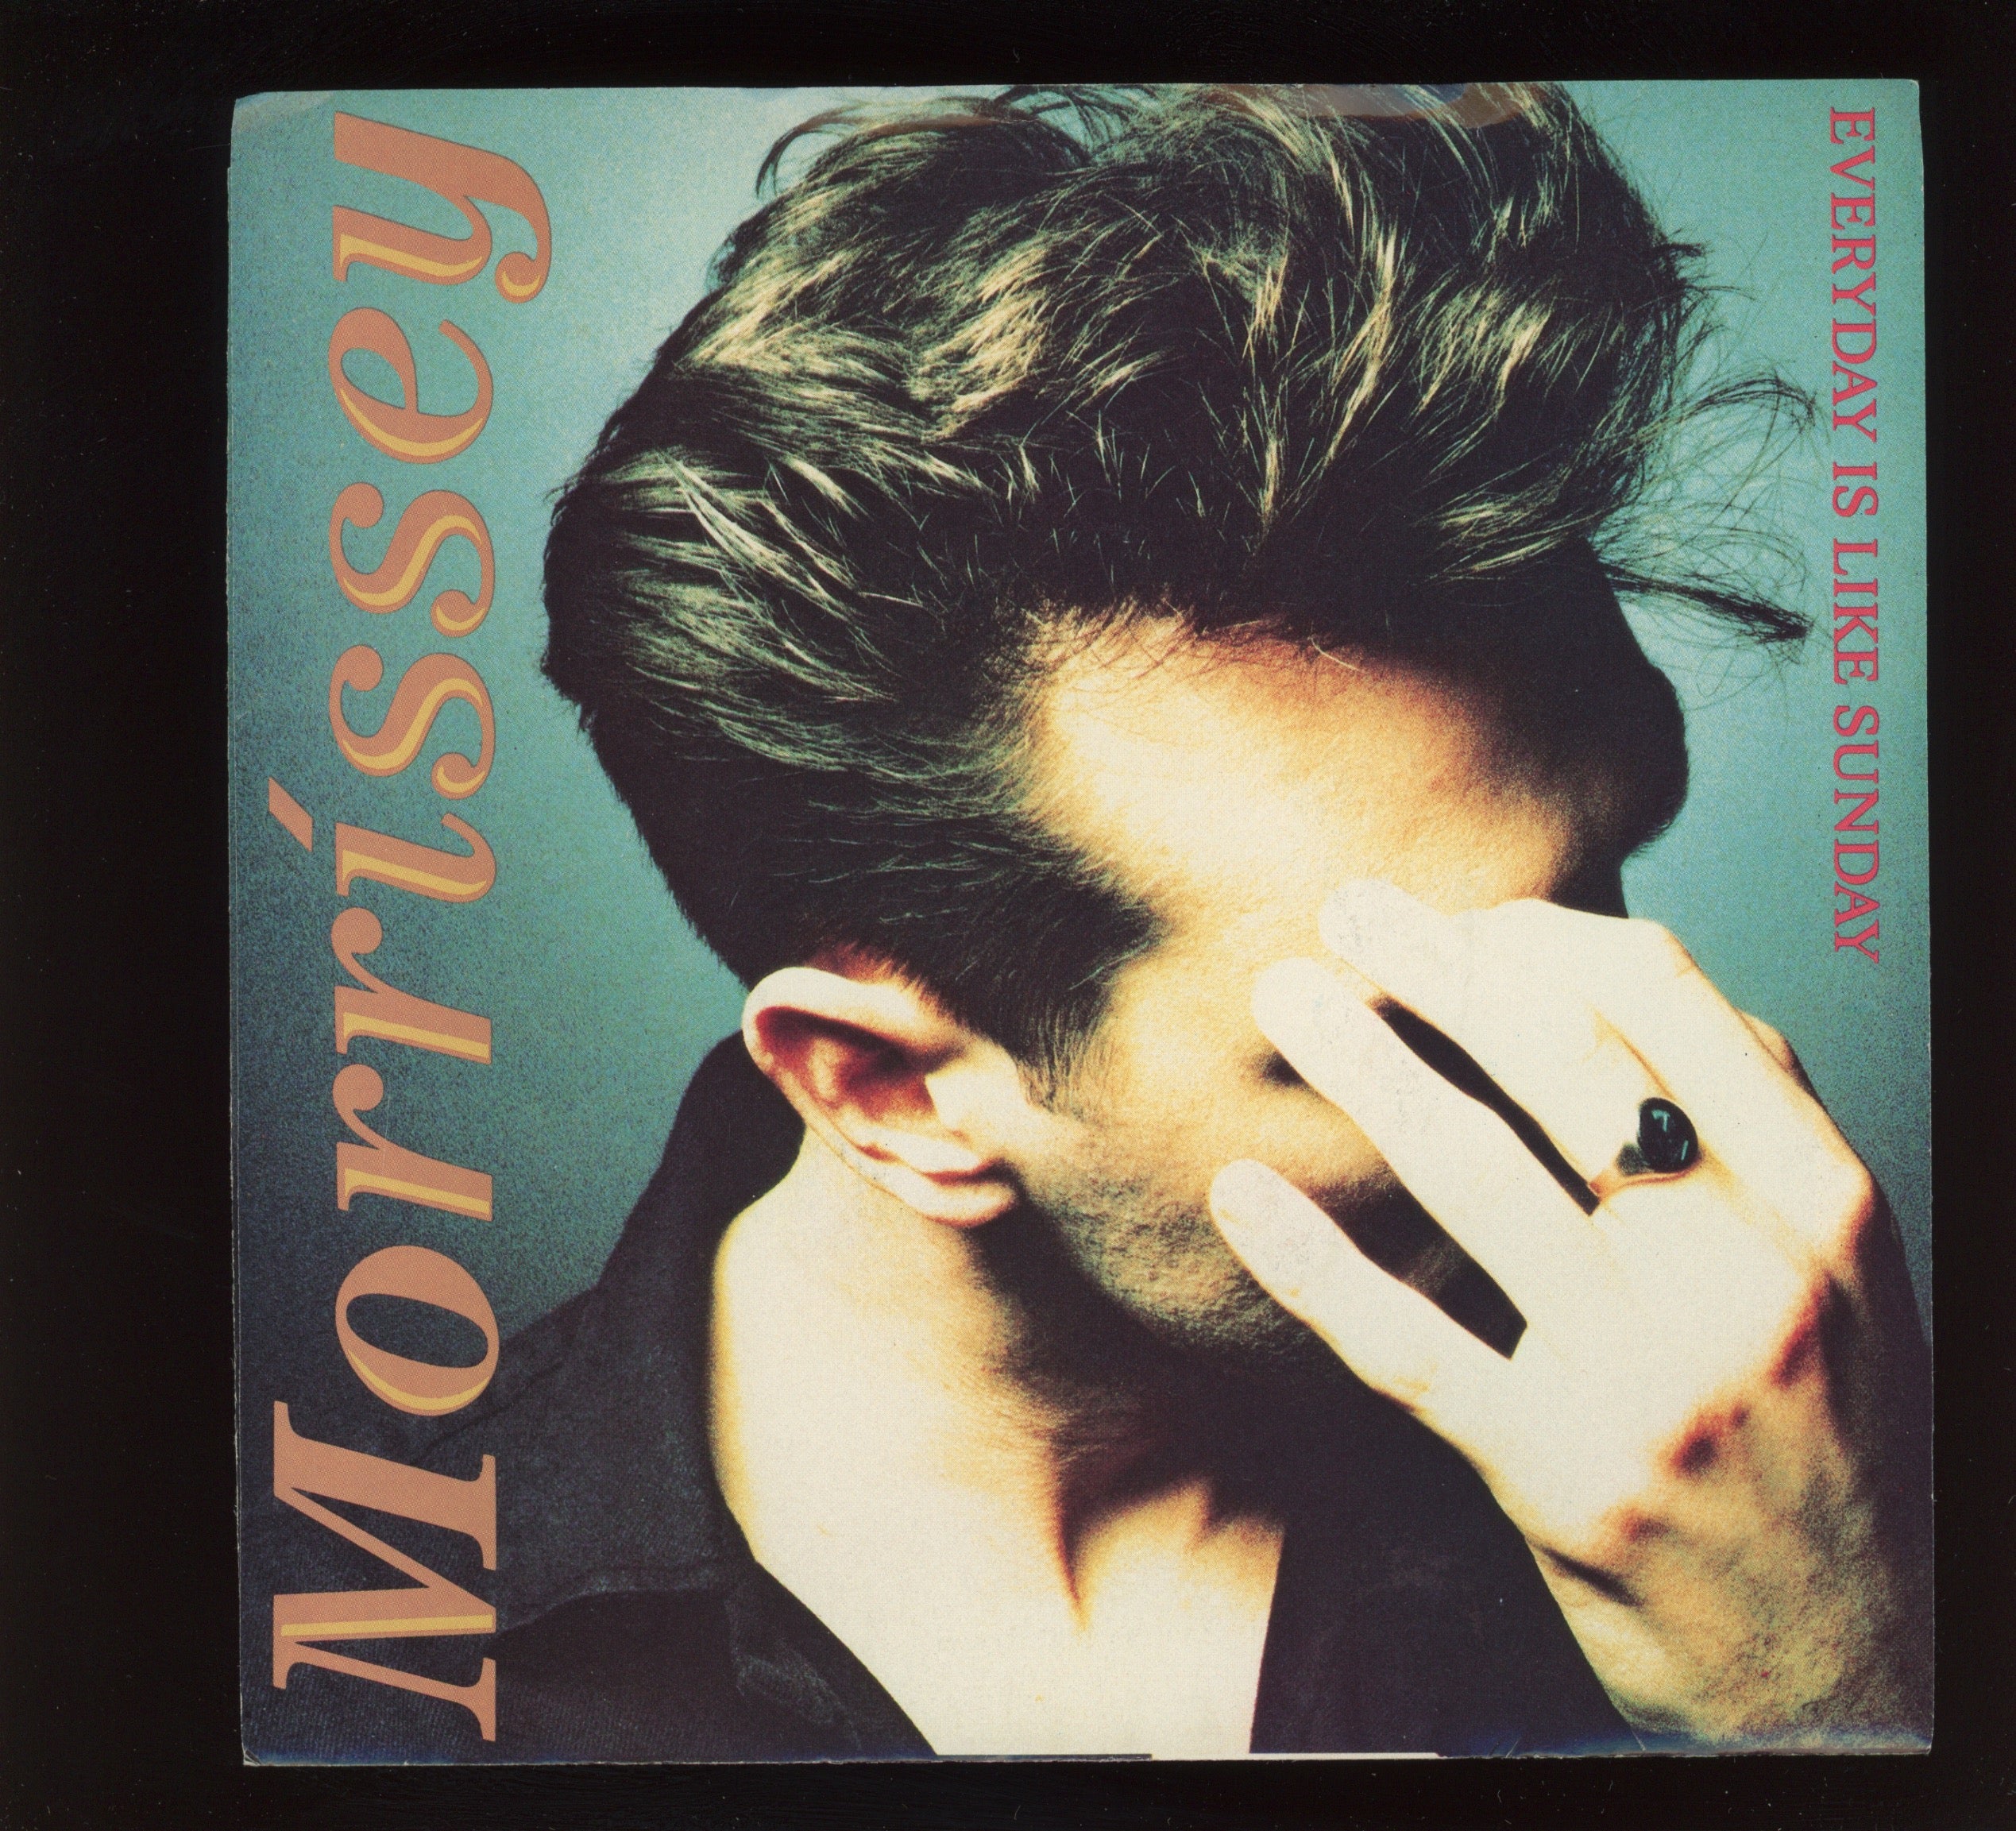 Morrissey - Everyday Is Like Sunday on Sire With Picture Sleeve